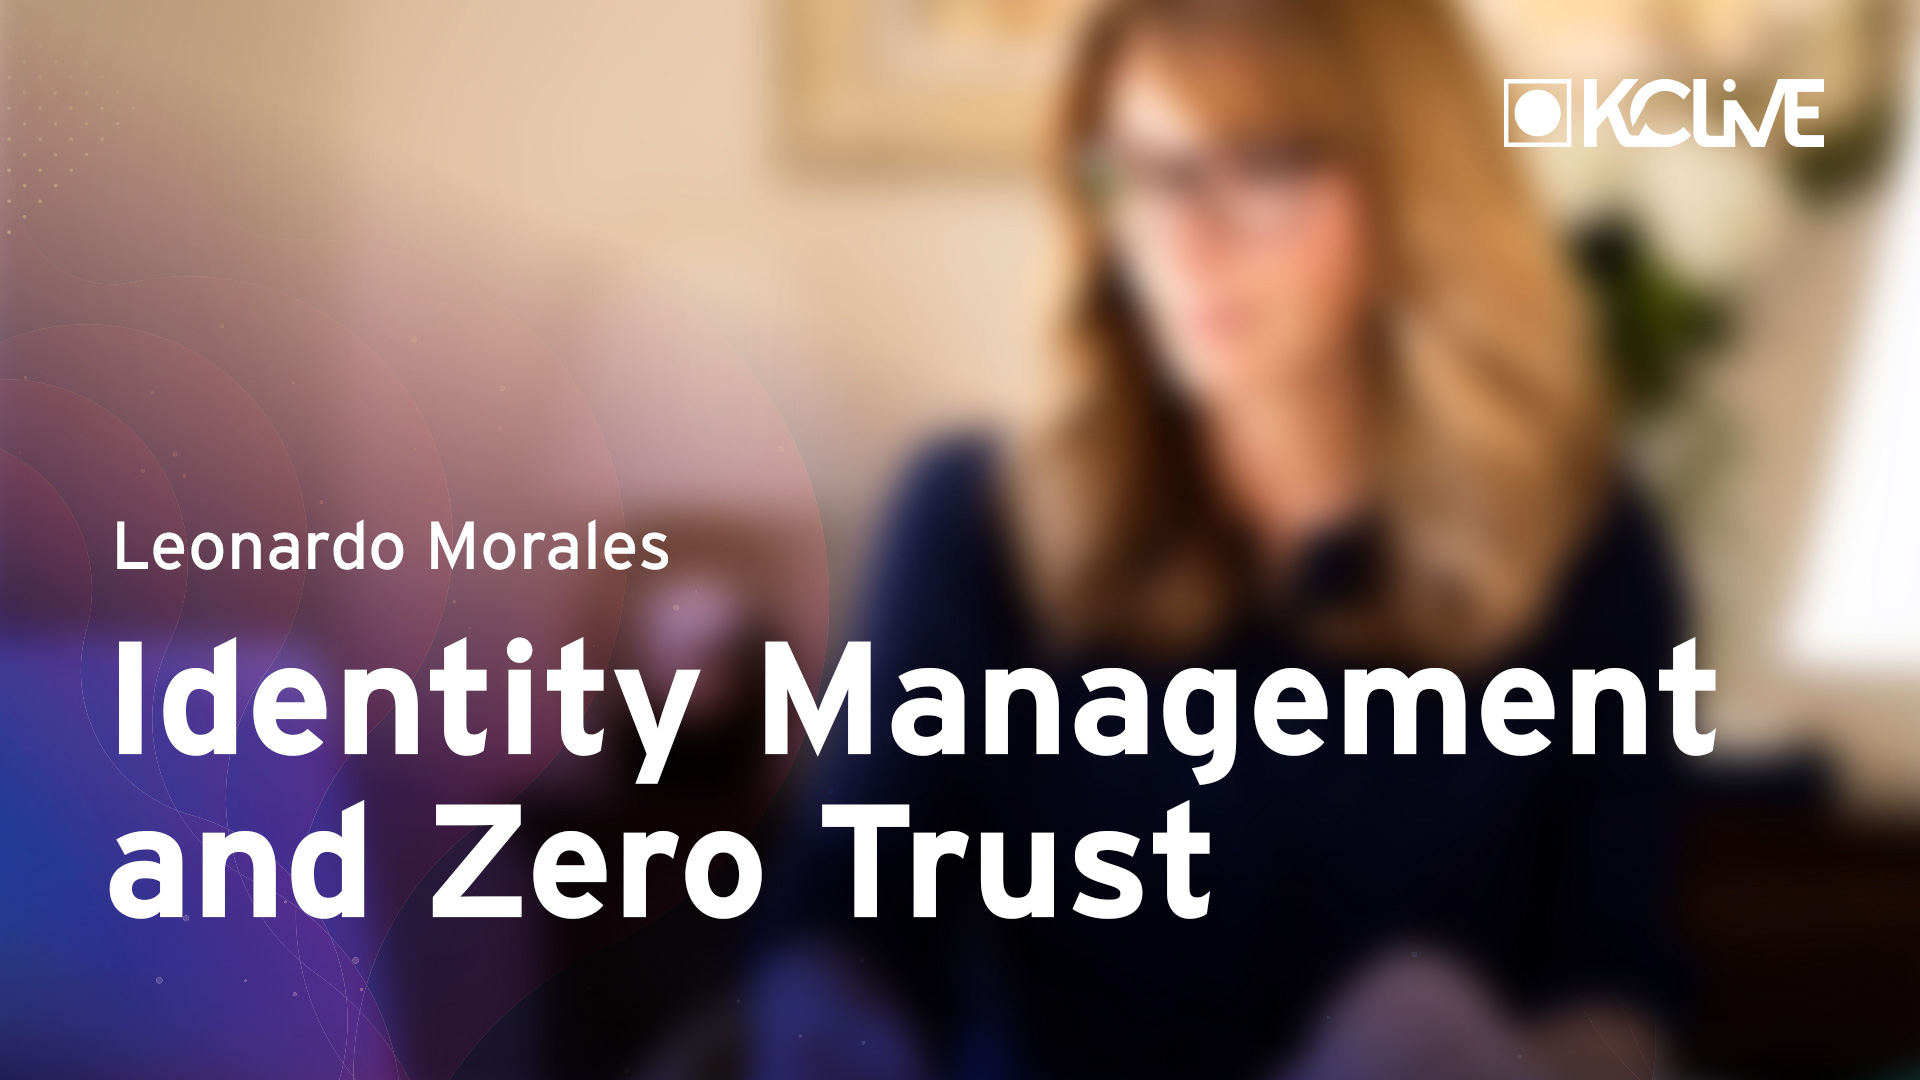 Identity Management and its key role in the Zero Trust strategy